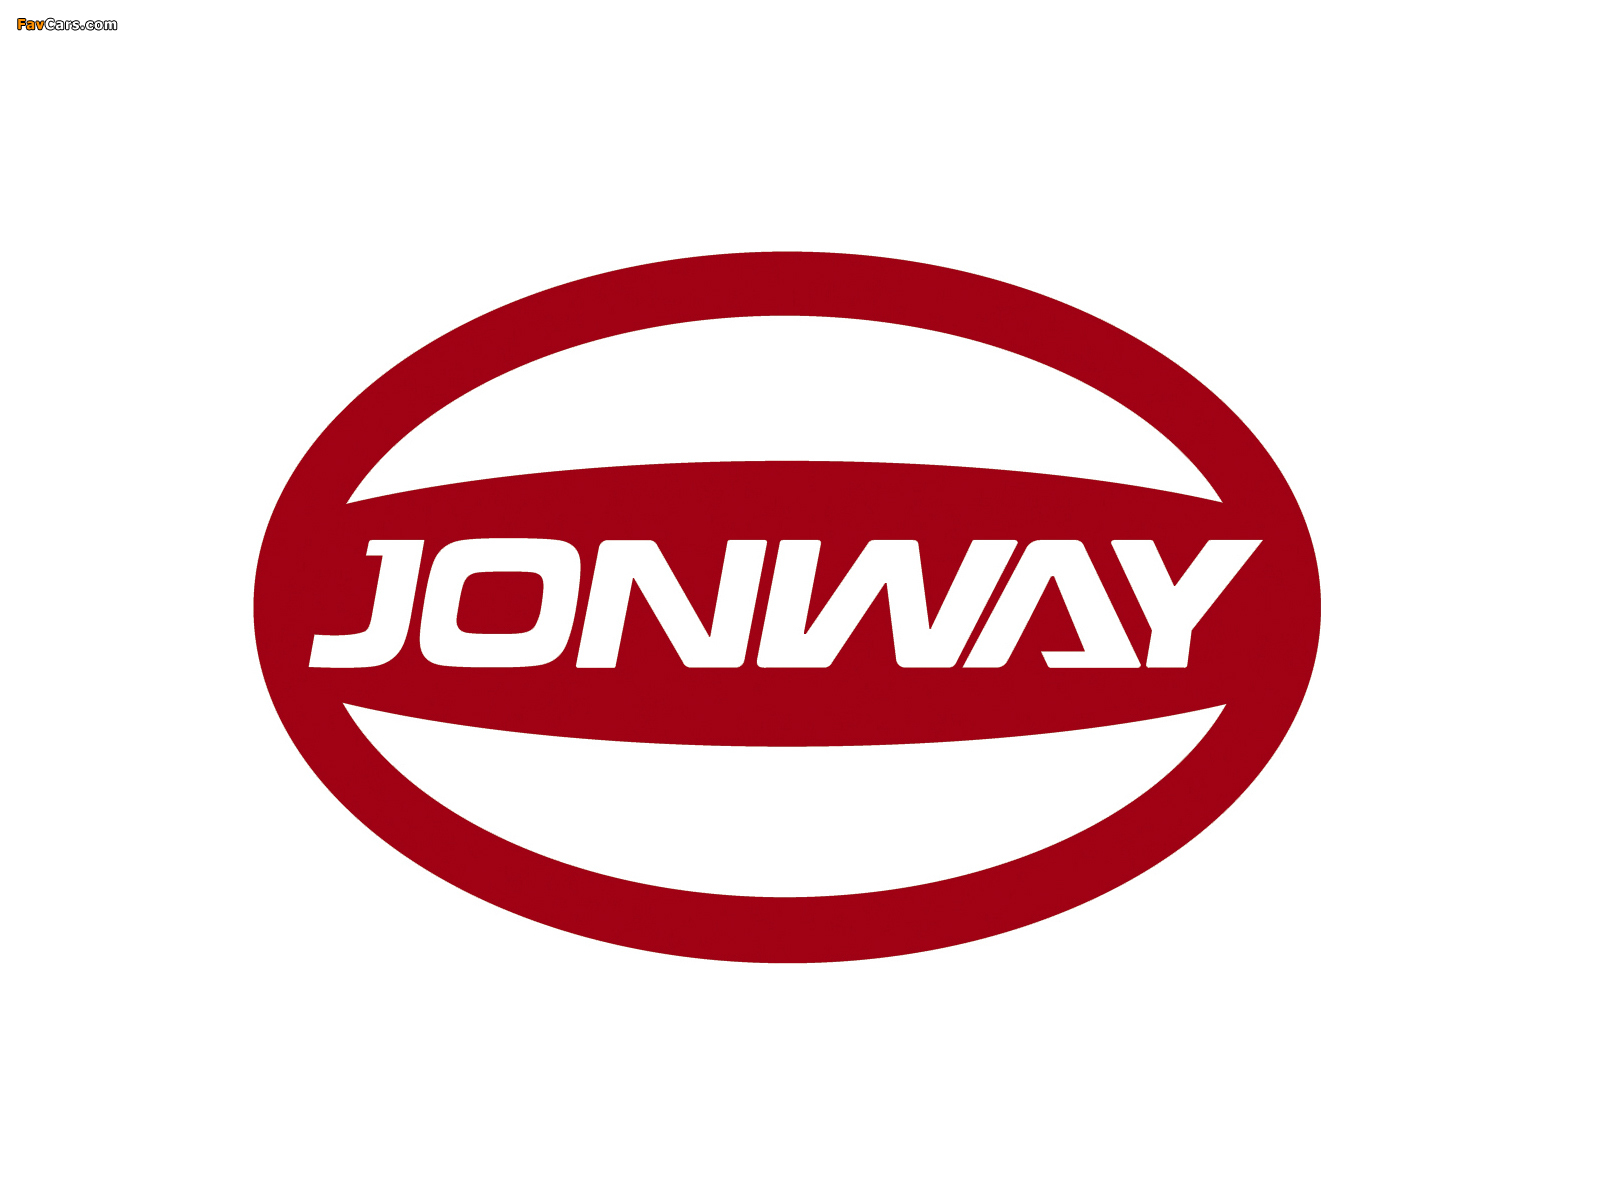 Images of Jonway (1600 x 1200)